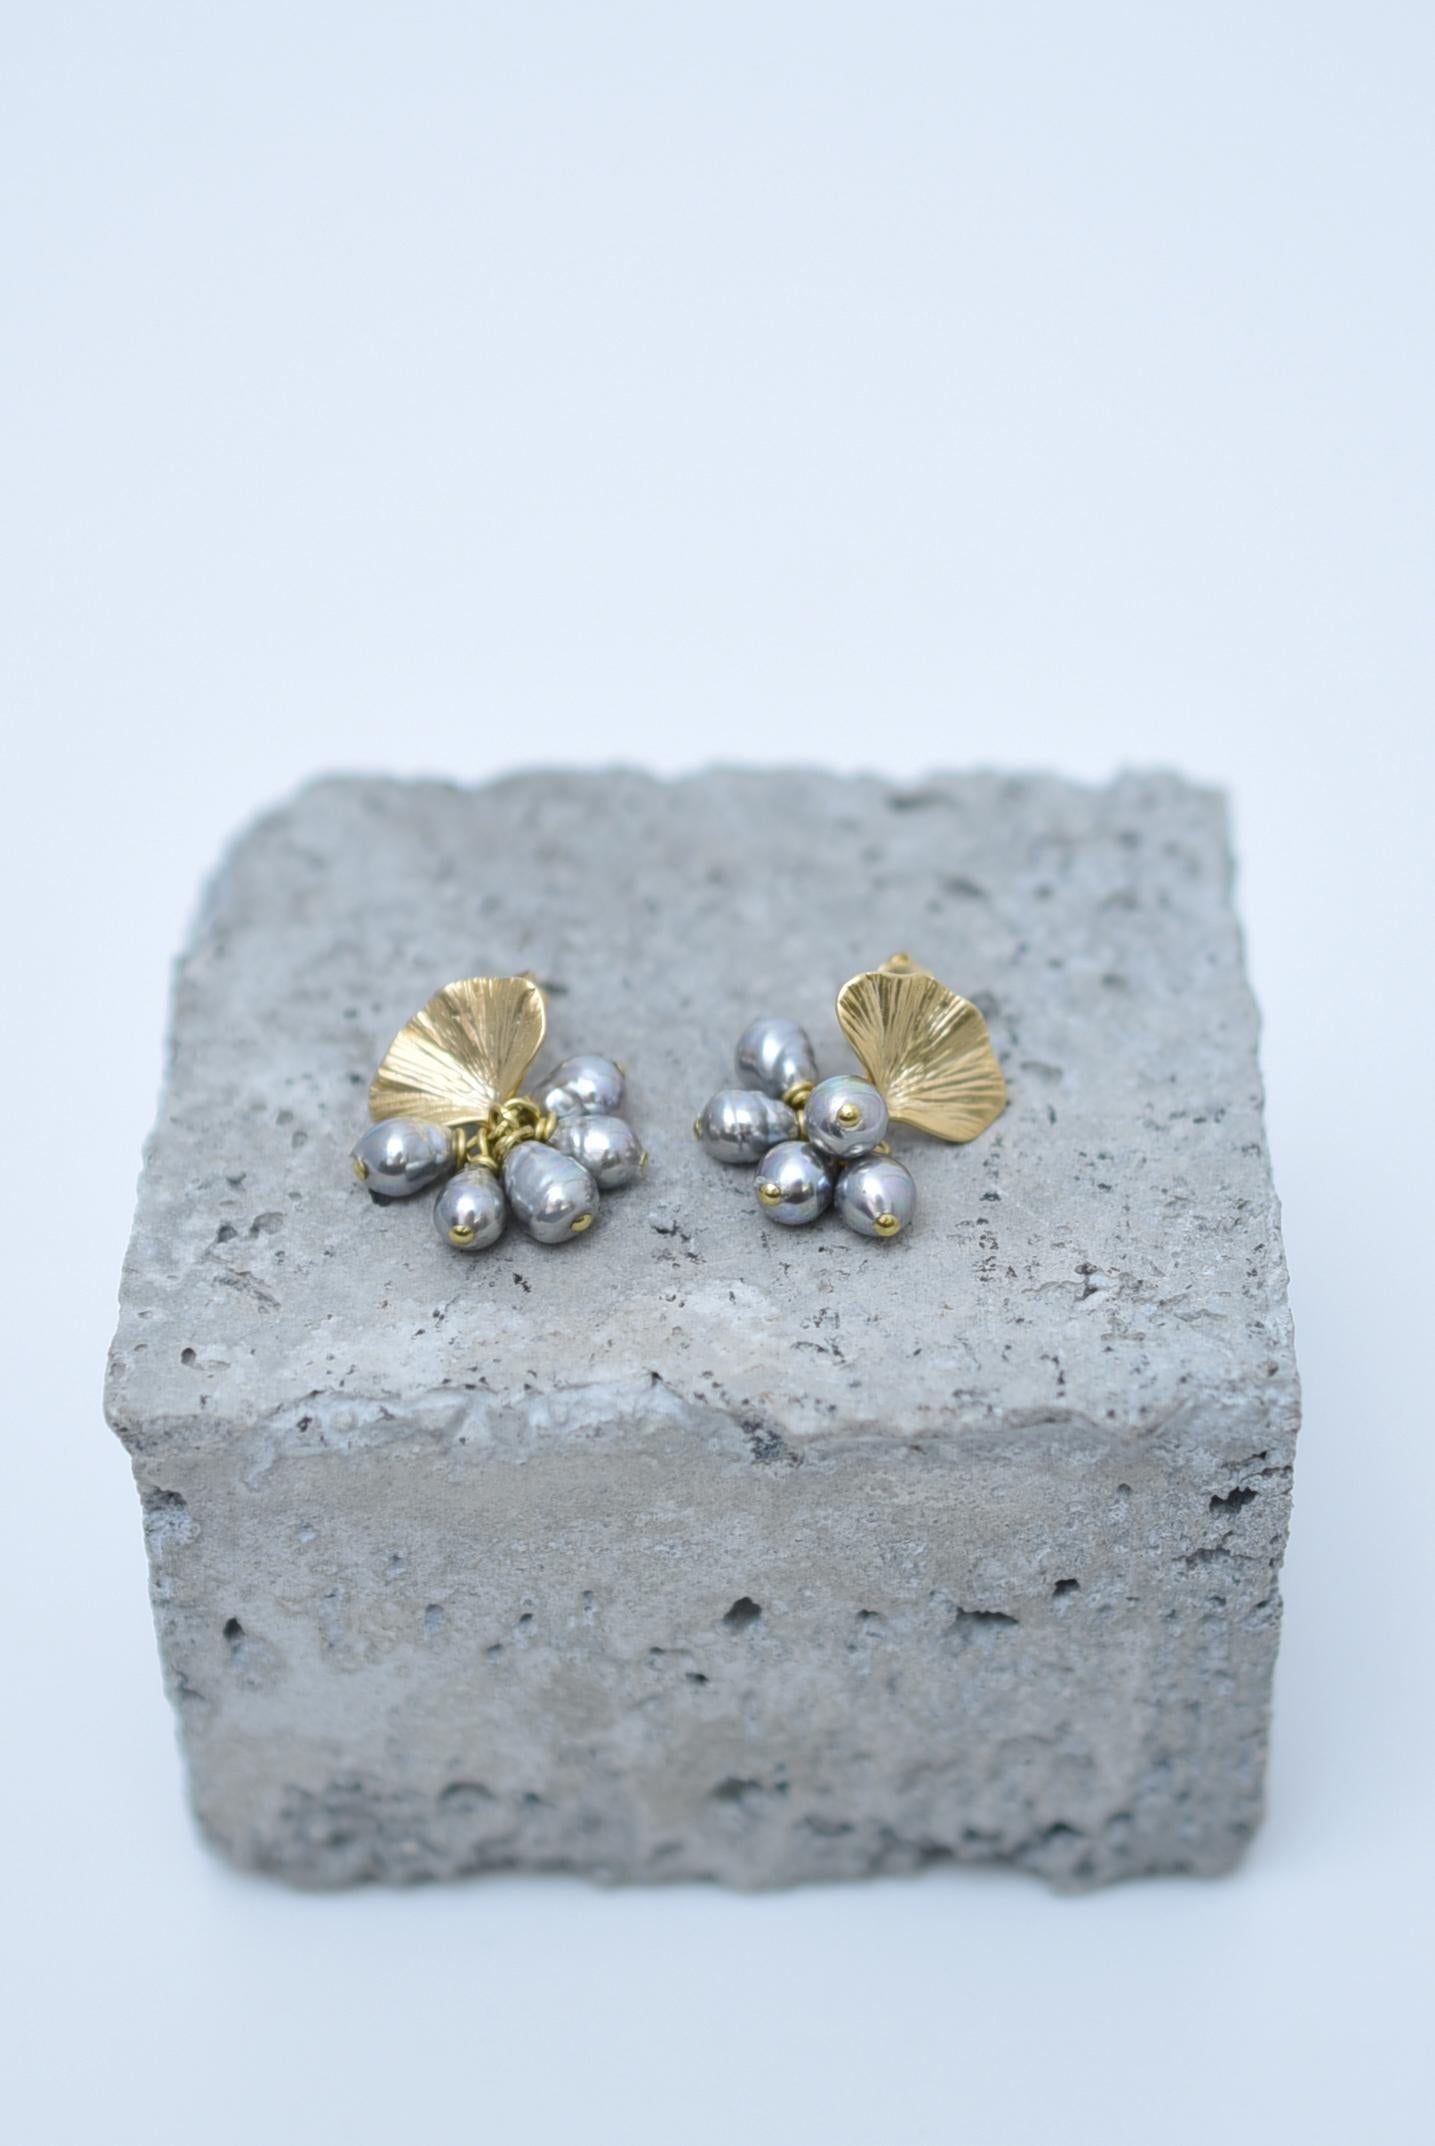 material:Brass, Vintage 1970s Japanese glass pearls, glass beads
size:length 1.7cm

Earring with vintage Japanese 1970s pearls in calm grey tones.
The gold in the gentle taste adds a touch of brightness.
